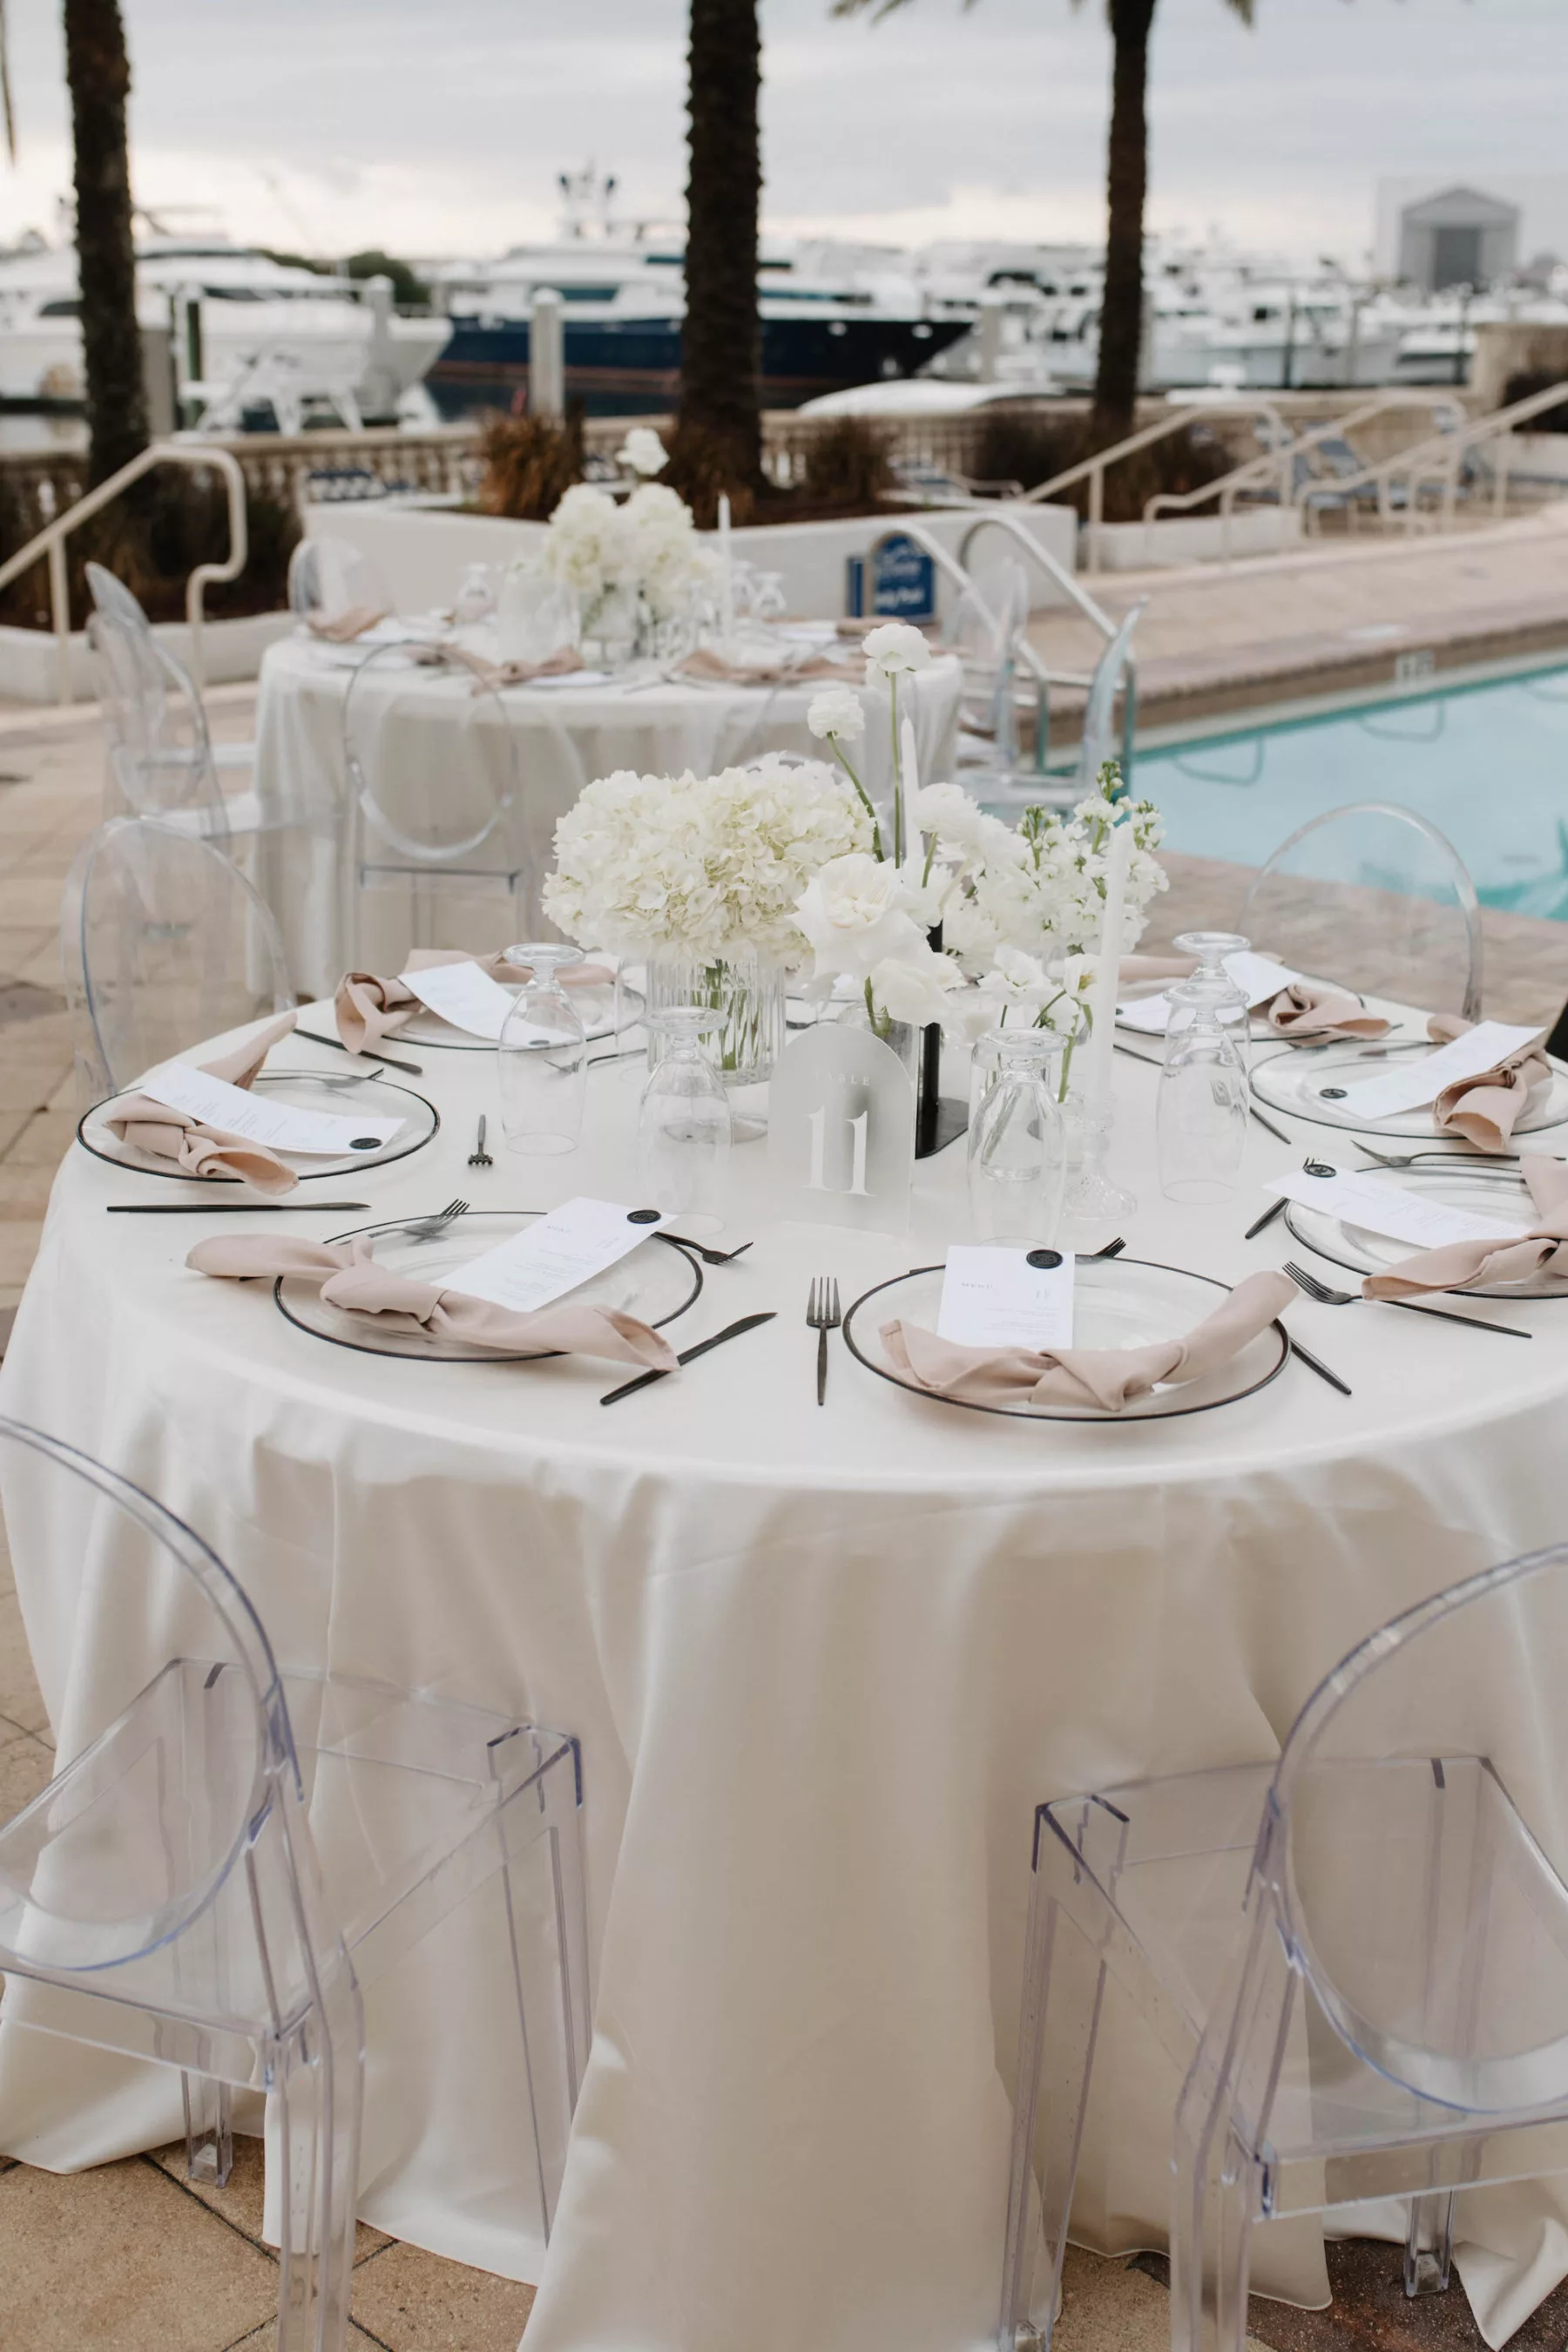 Modern Oceanview Poolside Wedding Reception Floral Centerpiece Decor Ideas | White Hydrangeas, Orchids, and Roses | Frosted Acrylic Table Number Signs | Clear Acrylic Ghost Chairs | Champagne Napkin Linens, Black-Rimmed Chargers, Black Flatware Place Setting Inspiration | Tampa Bay Kate Ryan Event Rentals